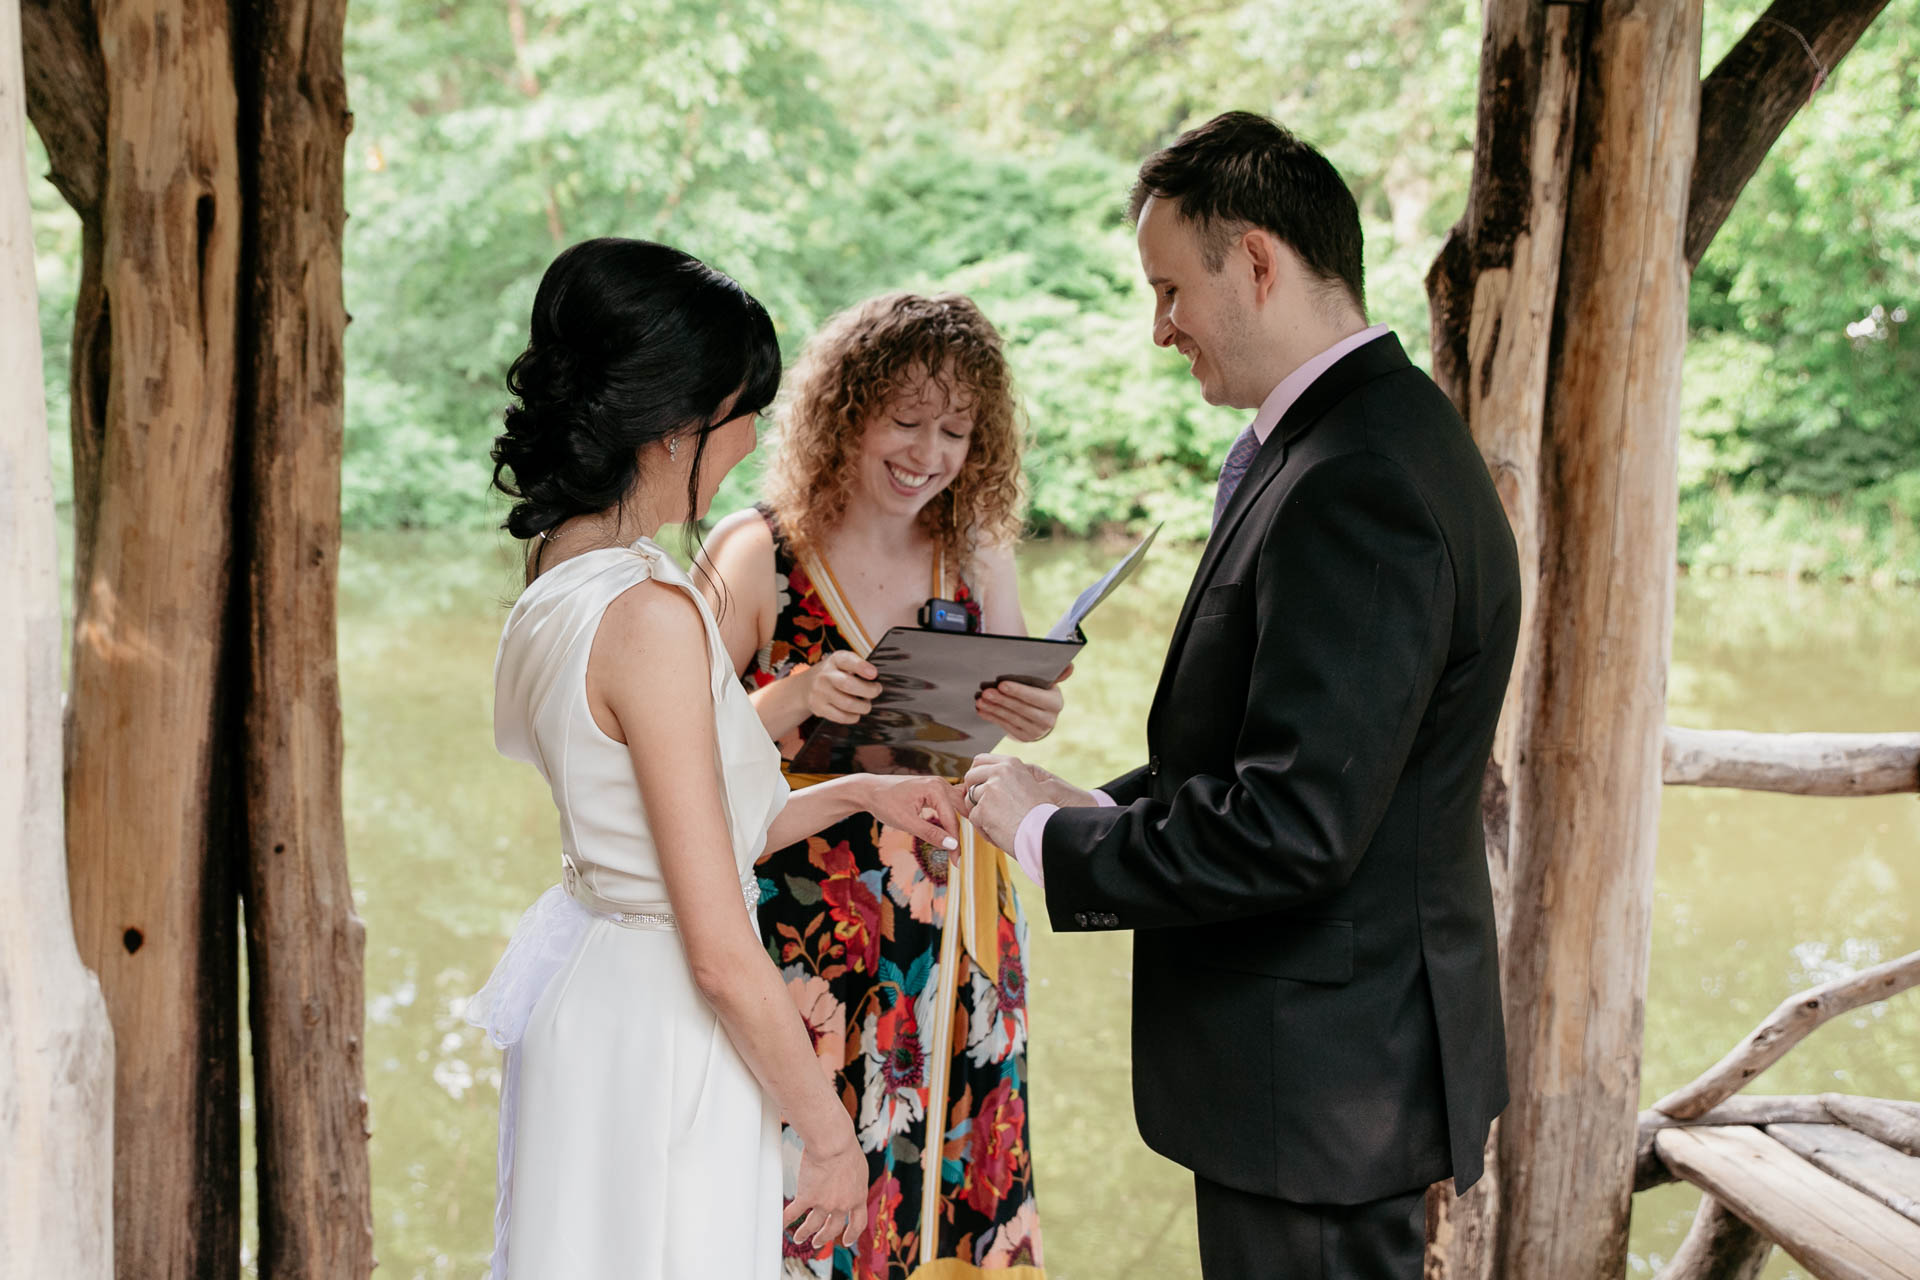 Elopement and intimate wedding photography packages